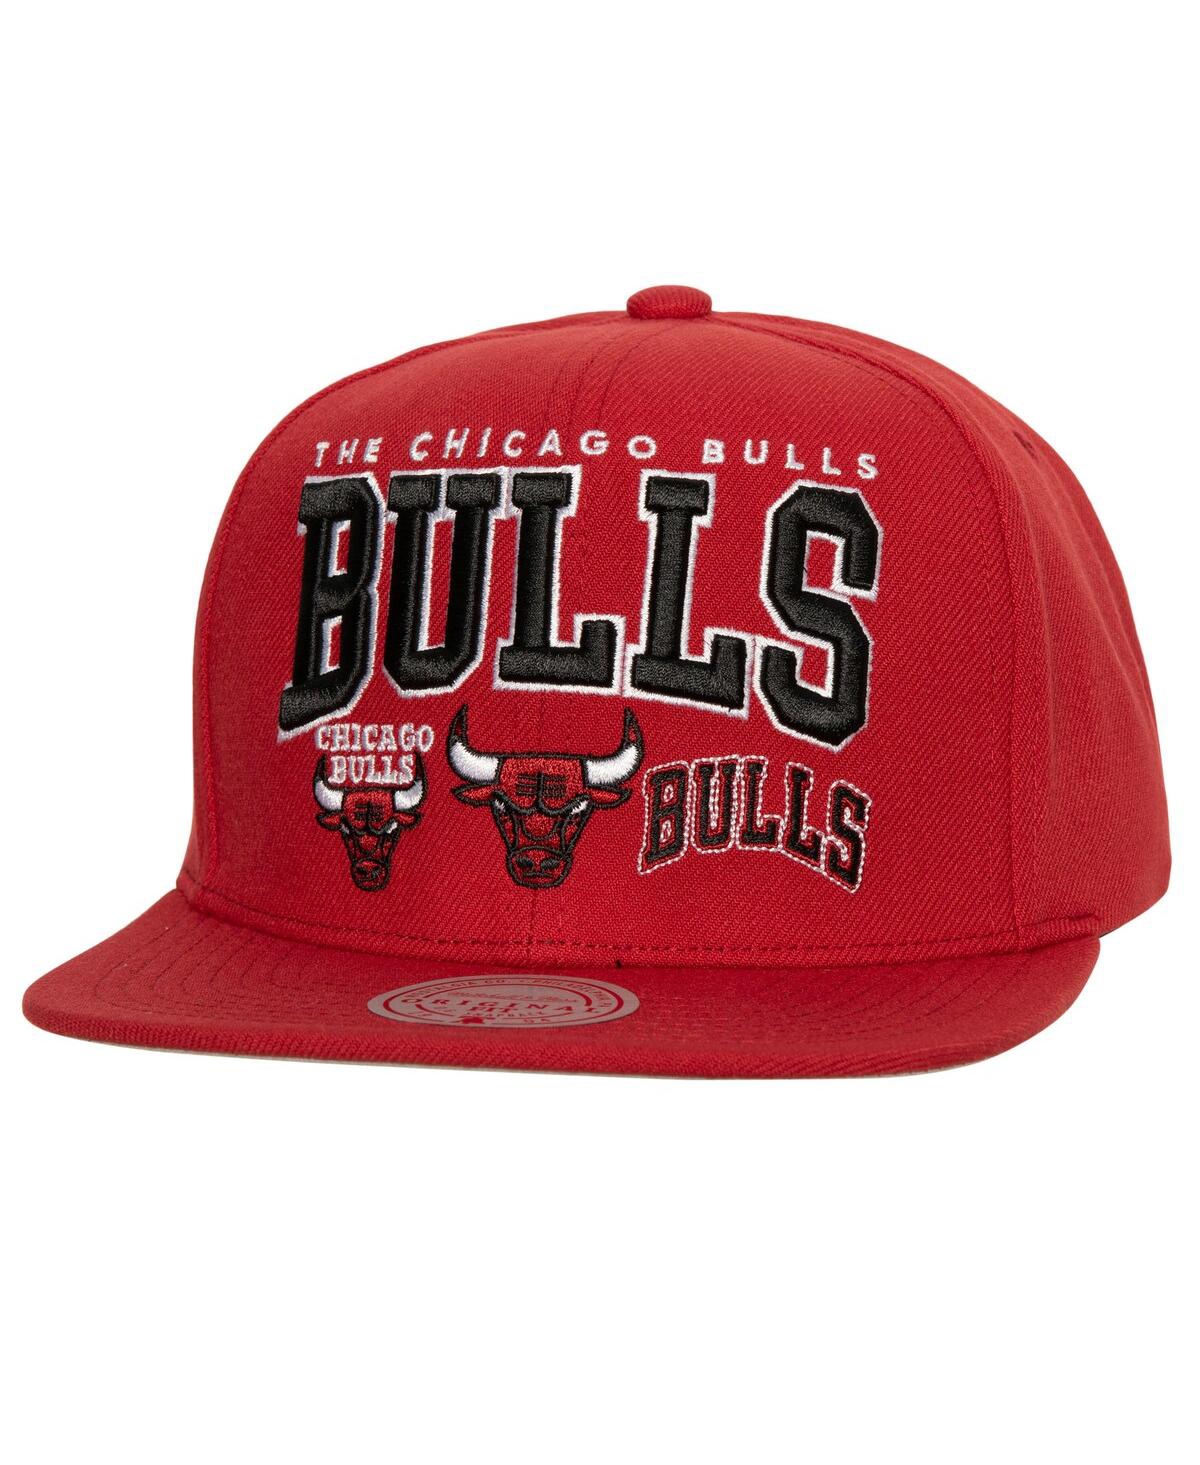 Shop Mitchell & Ness Men's  Red Chicago Bulls Champ Stack Snapback Hat